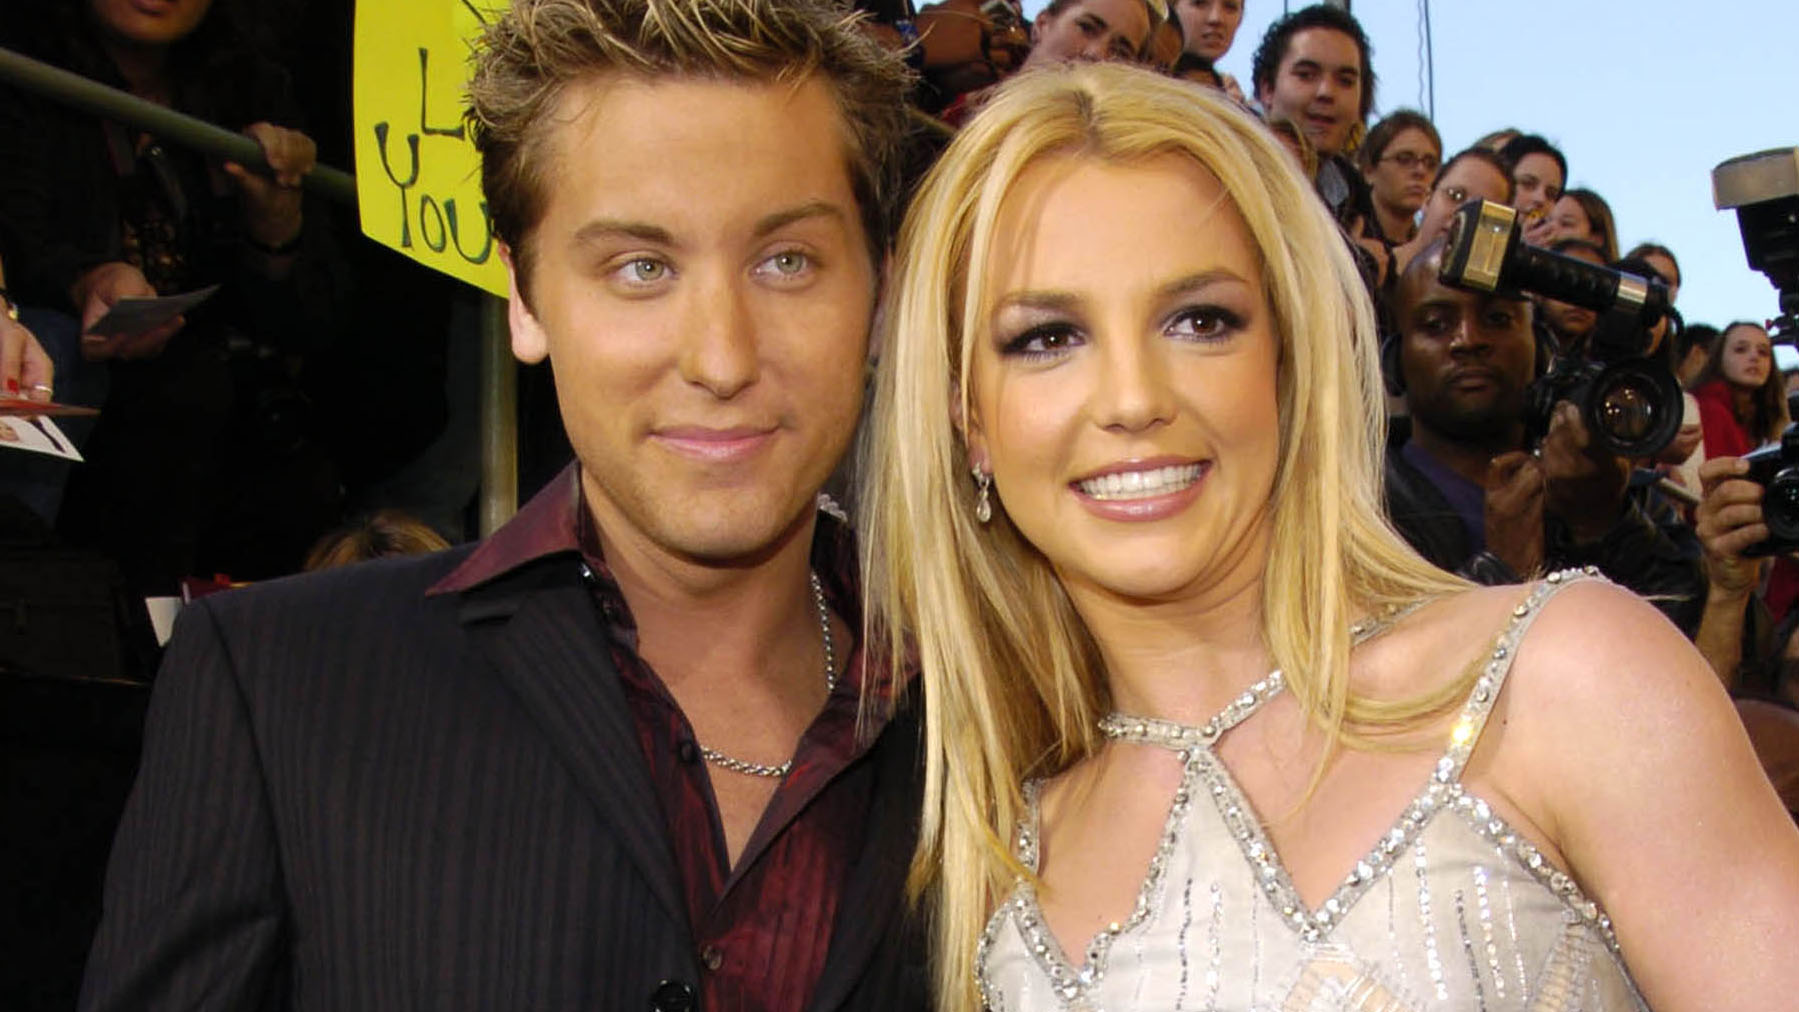 Lance Bass and Britney Spears